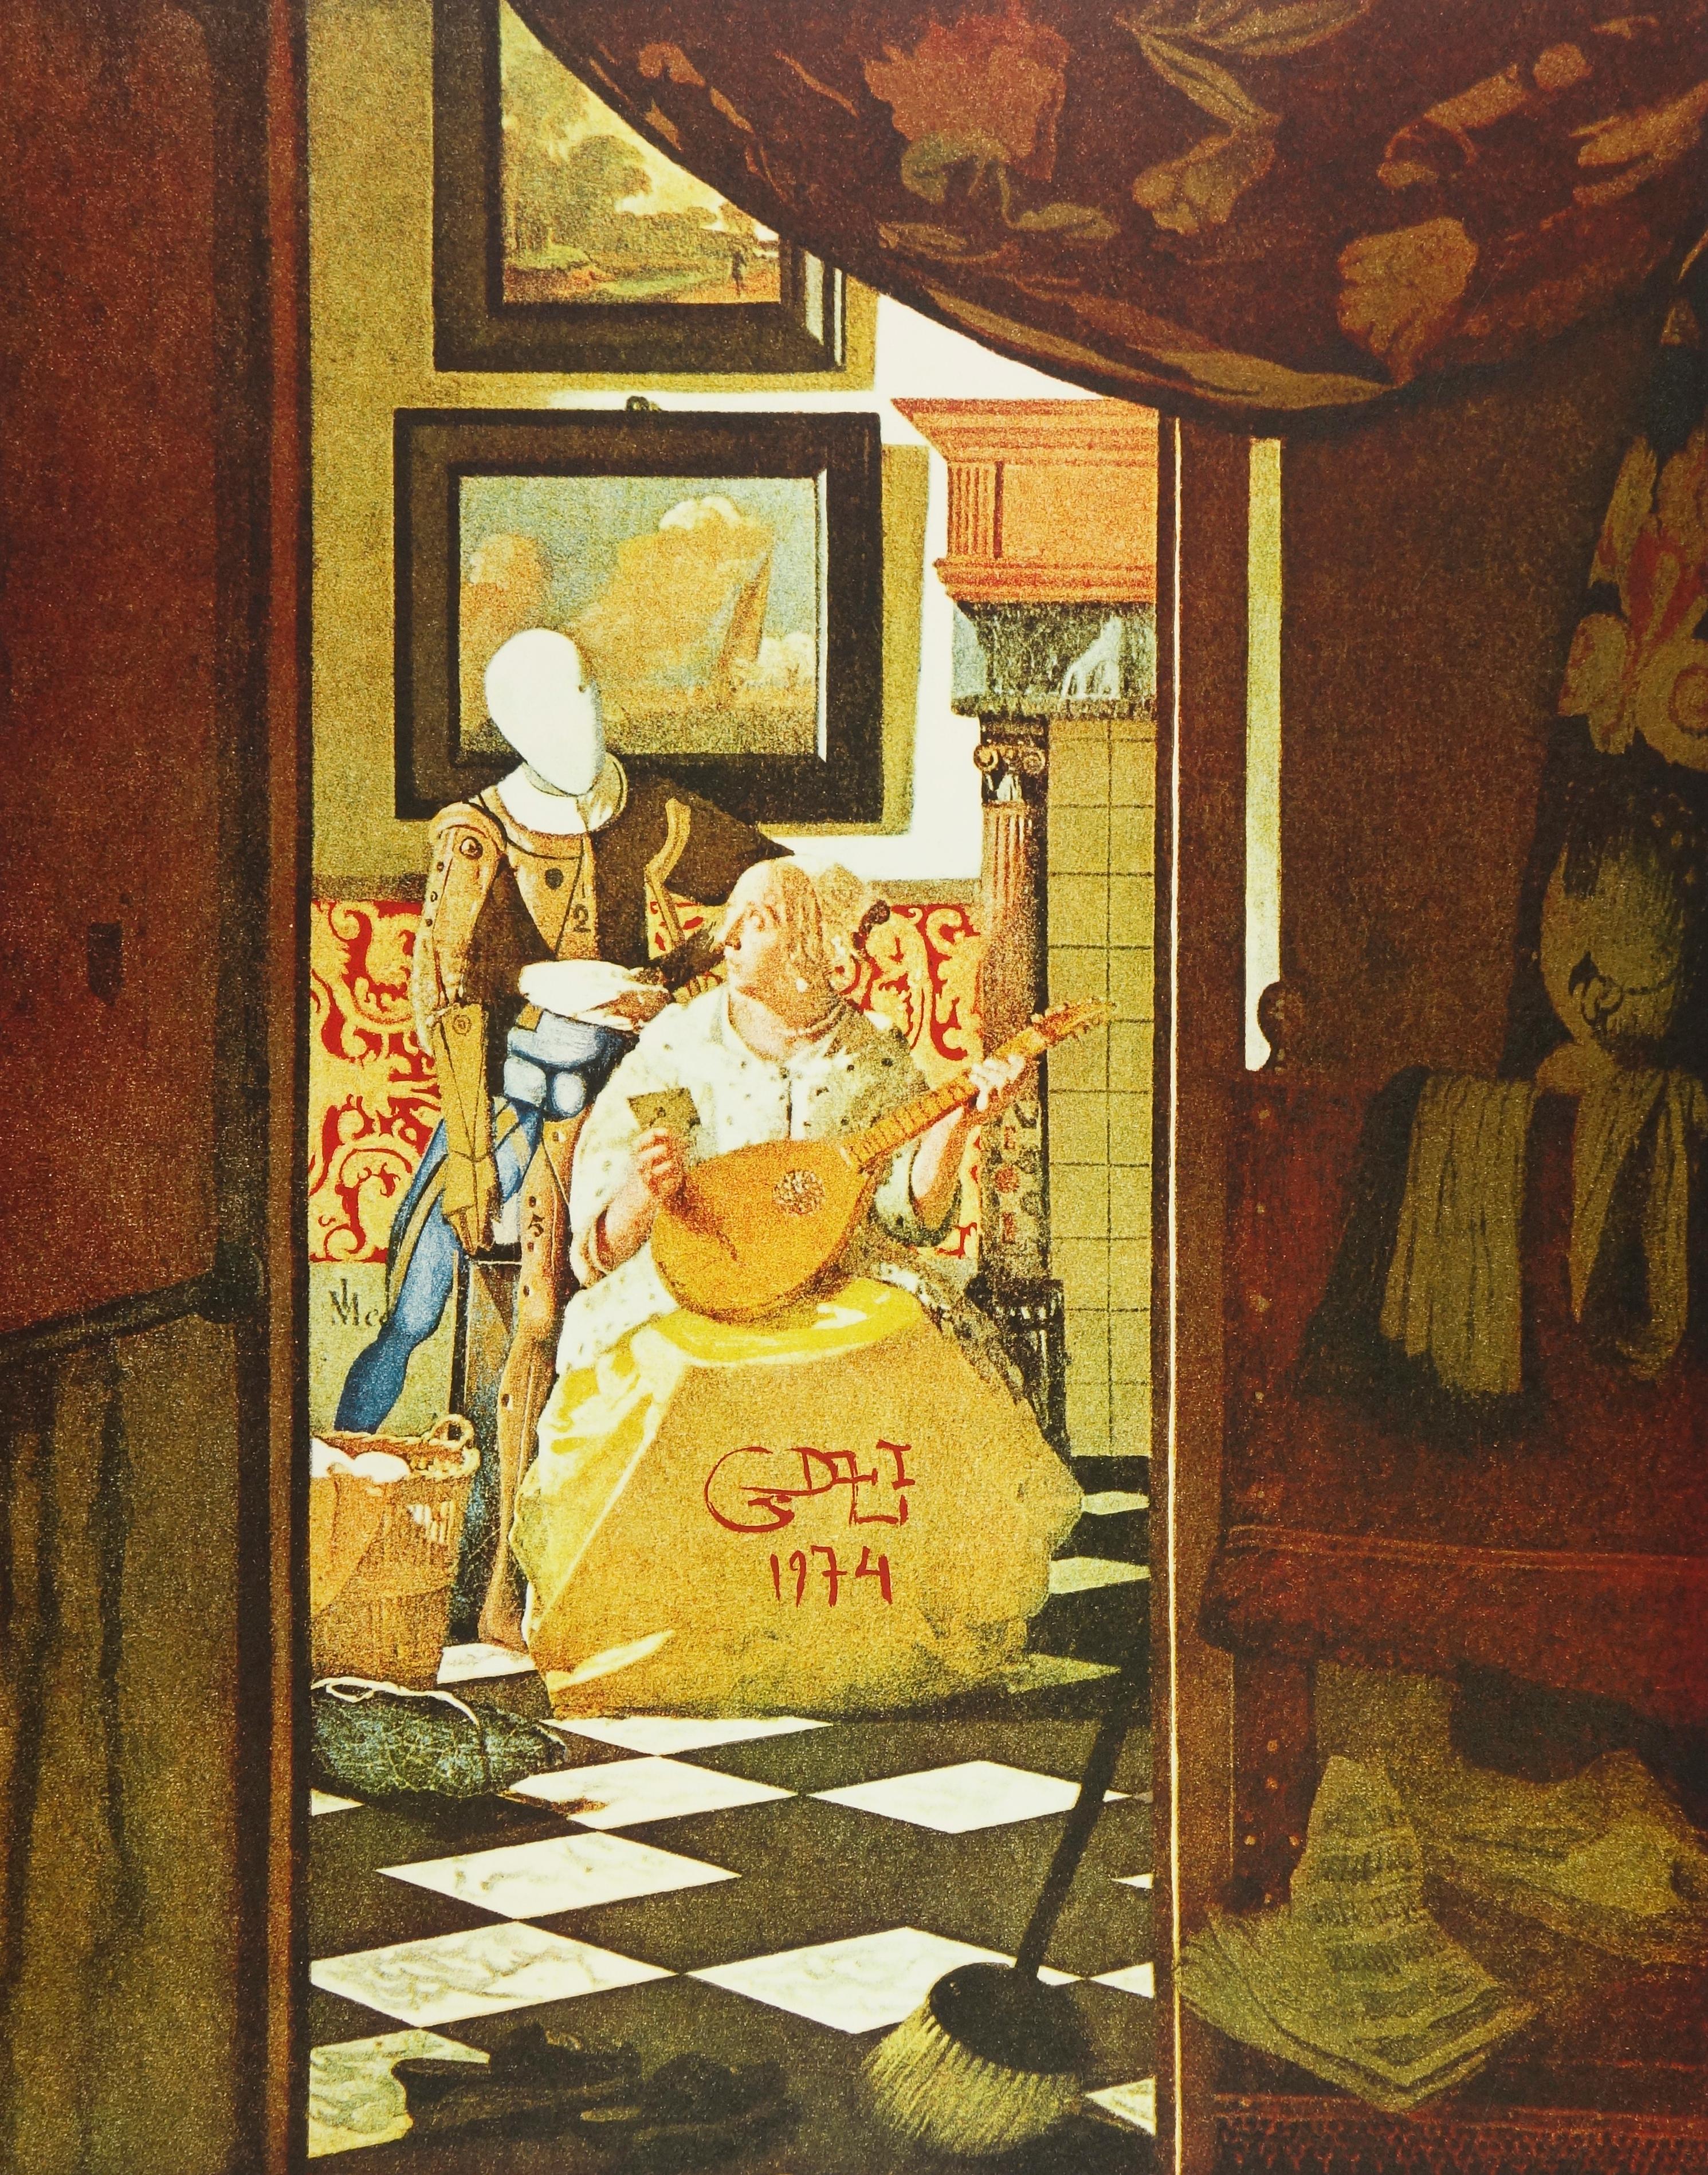 Vermeer La Lettre from Changes in Great Masterpieces - Print by Salvador Dalí